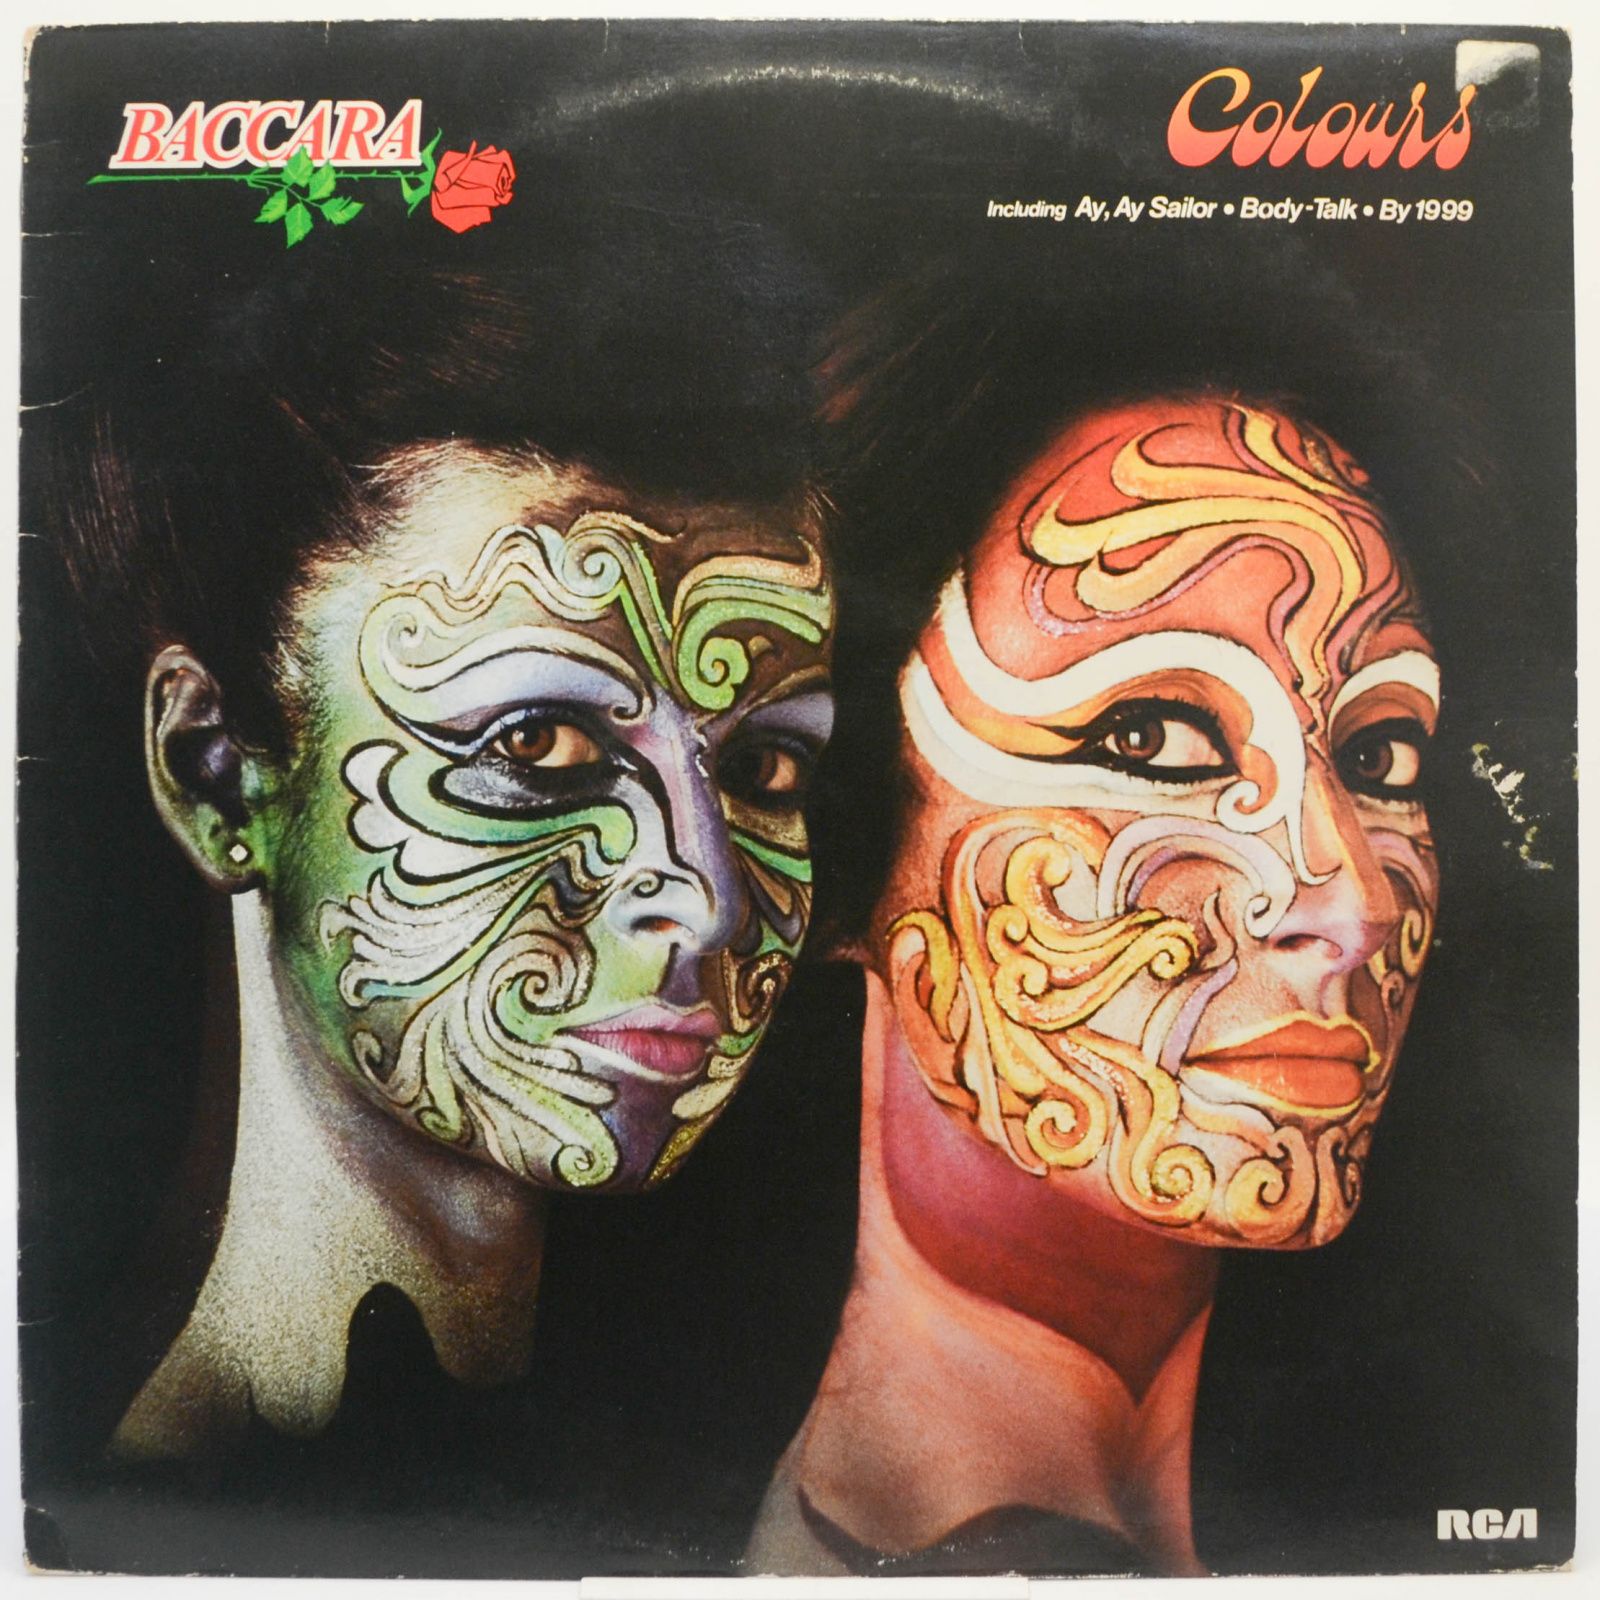 Baccara — Colours, 1979